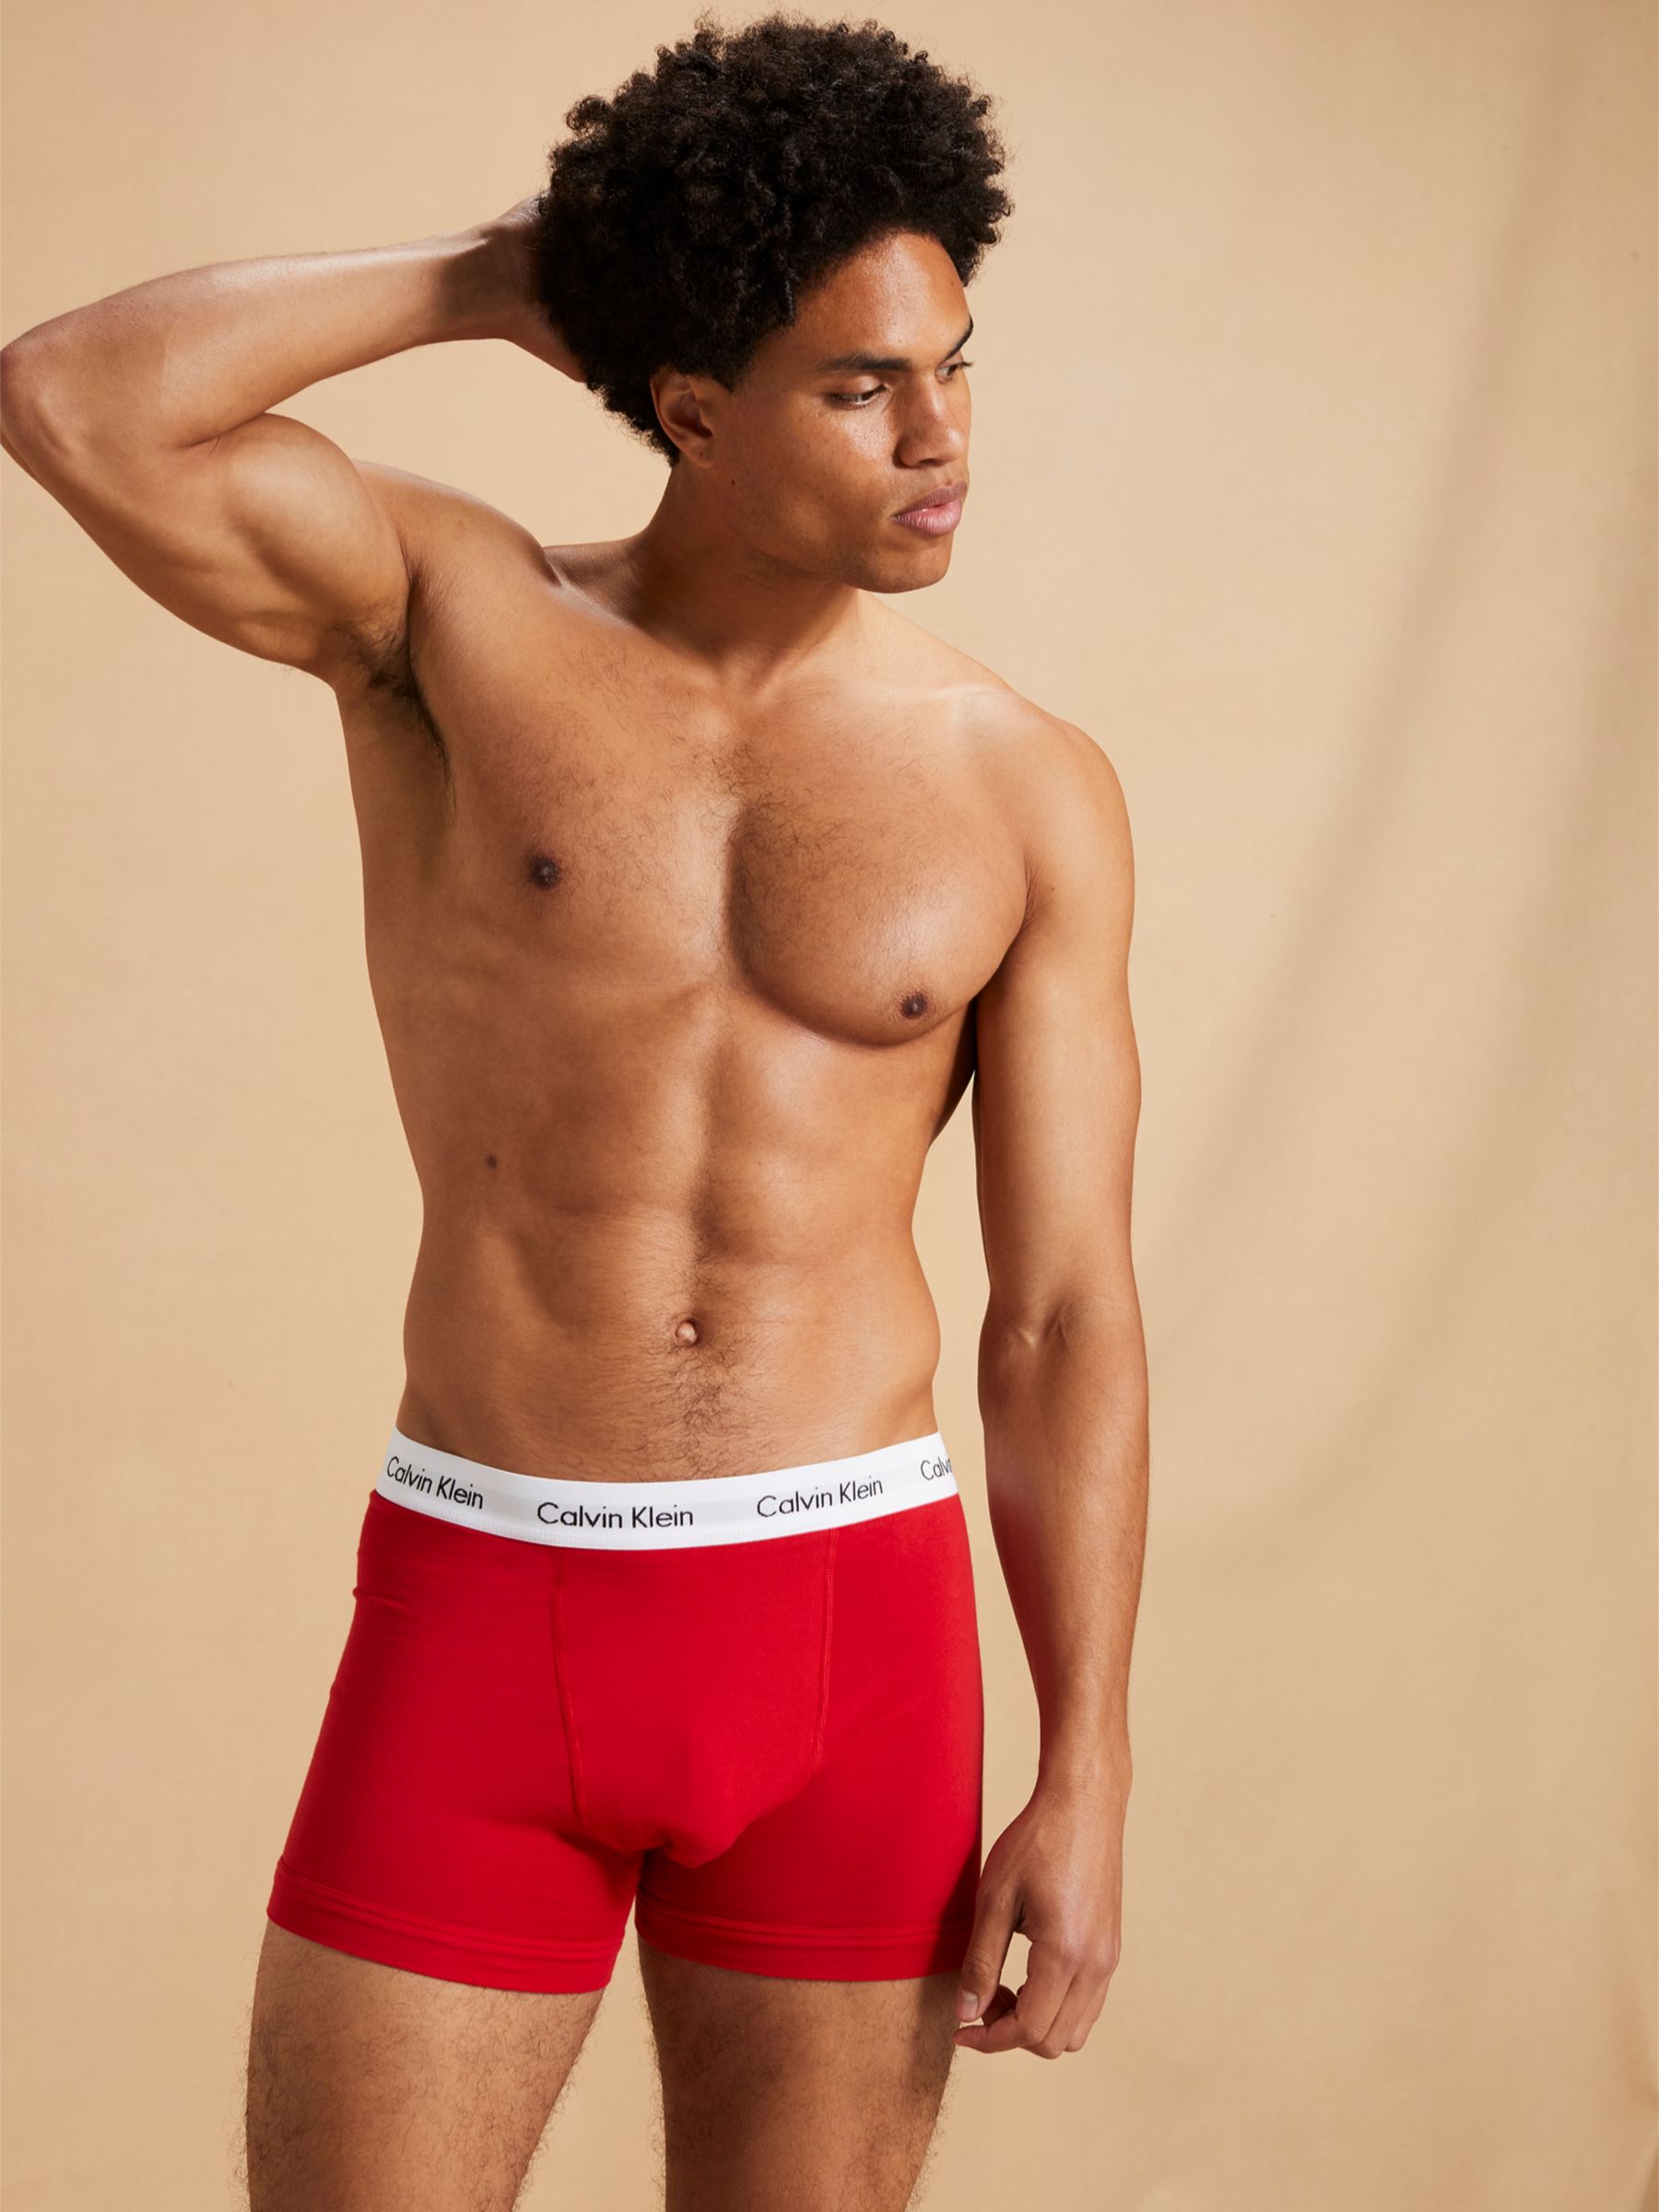 Calvin Klein Regular Cotton Stretch Trunks, Pack of 3, White/Red/Blue at  John Lewis & Partners